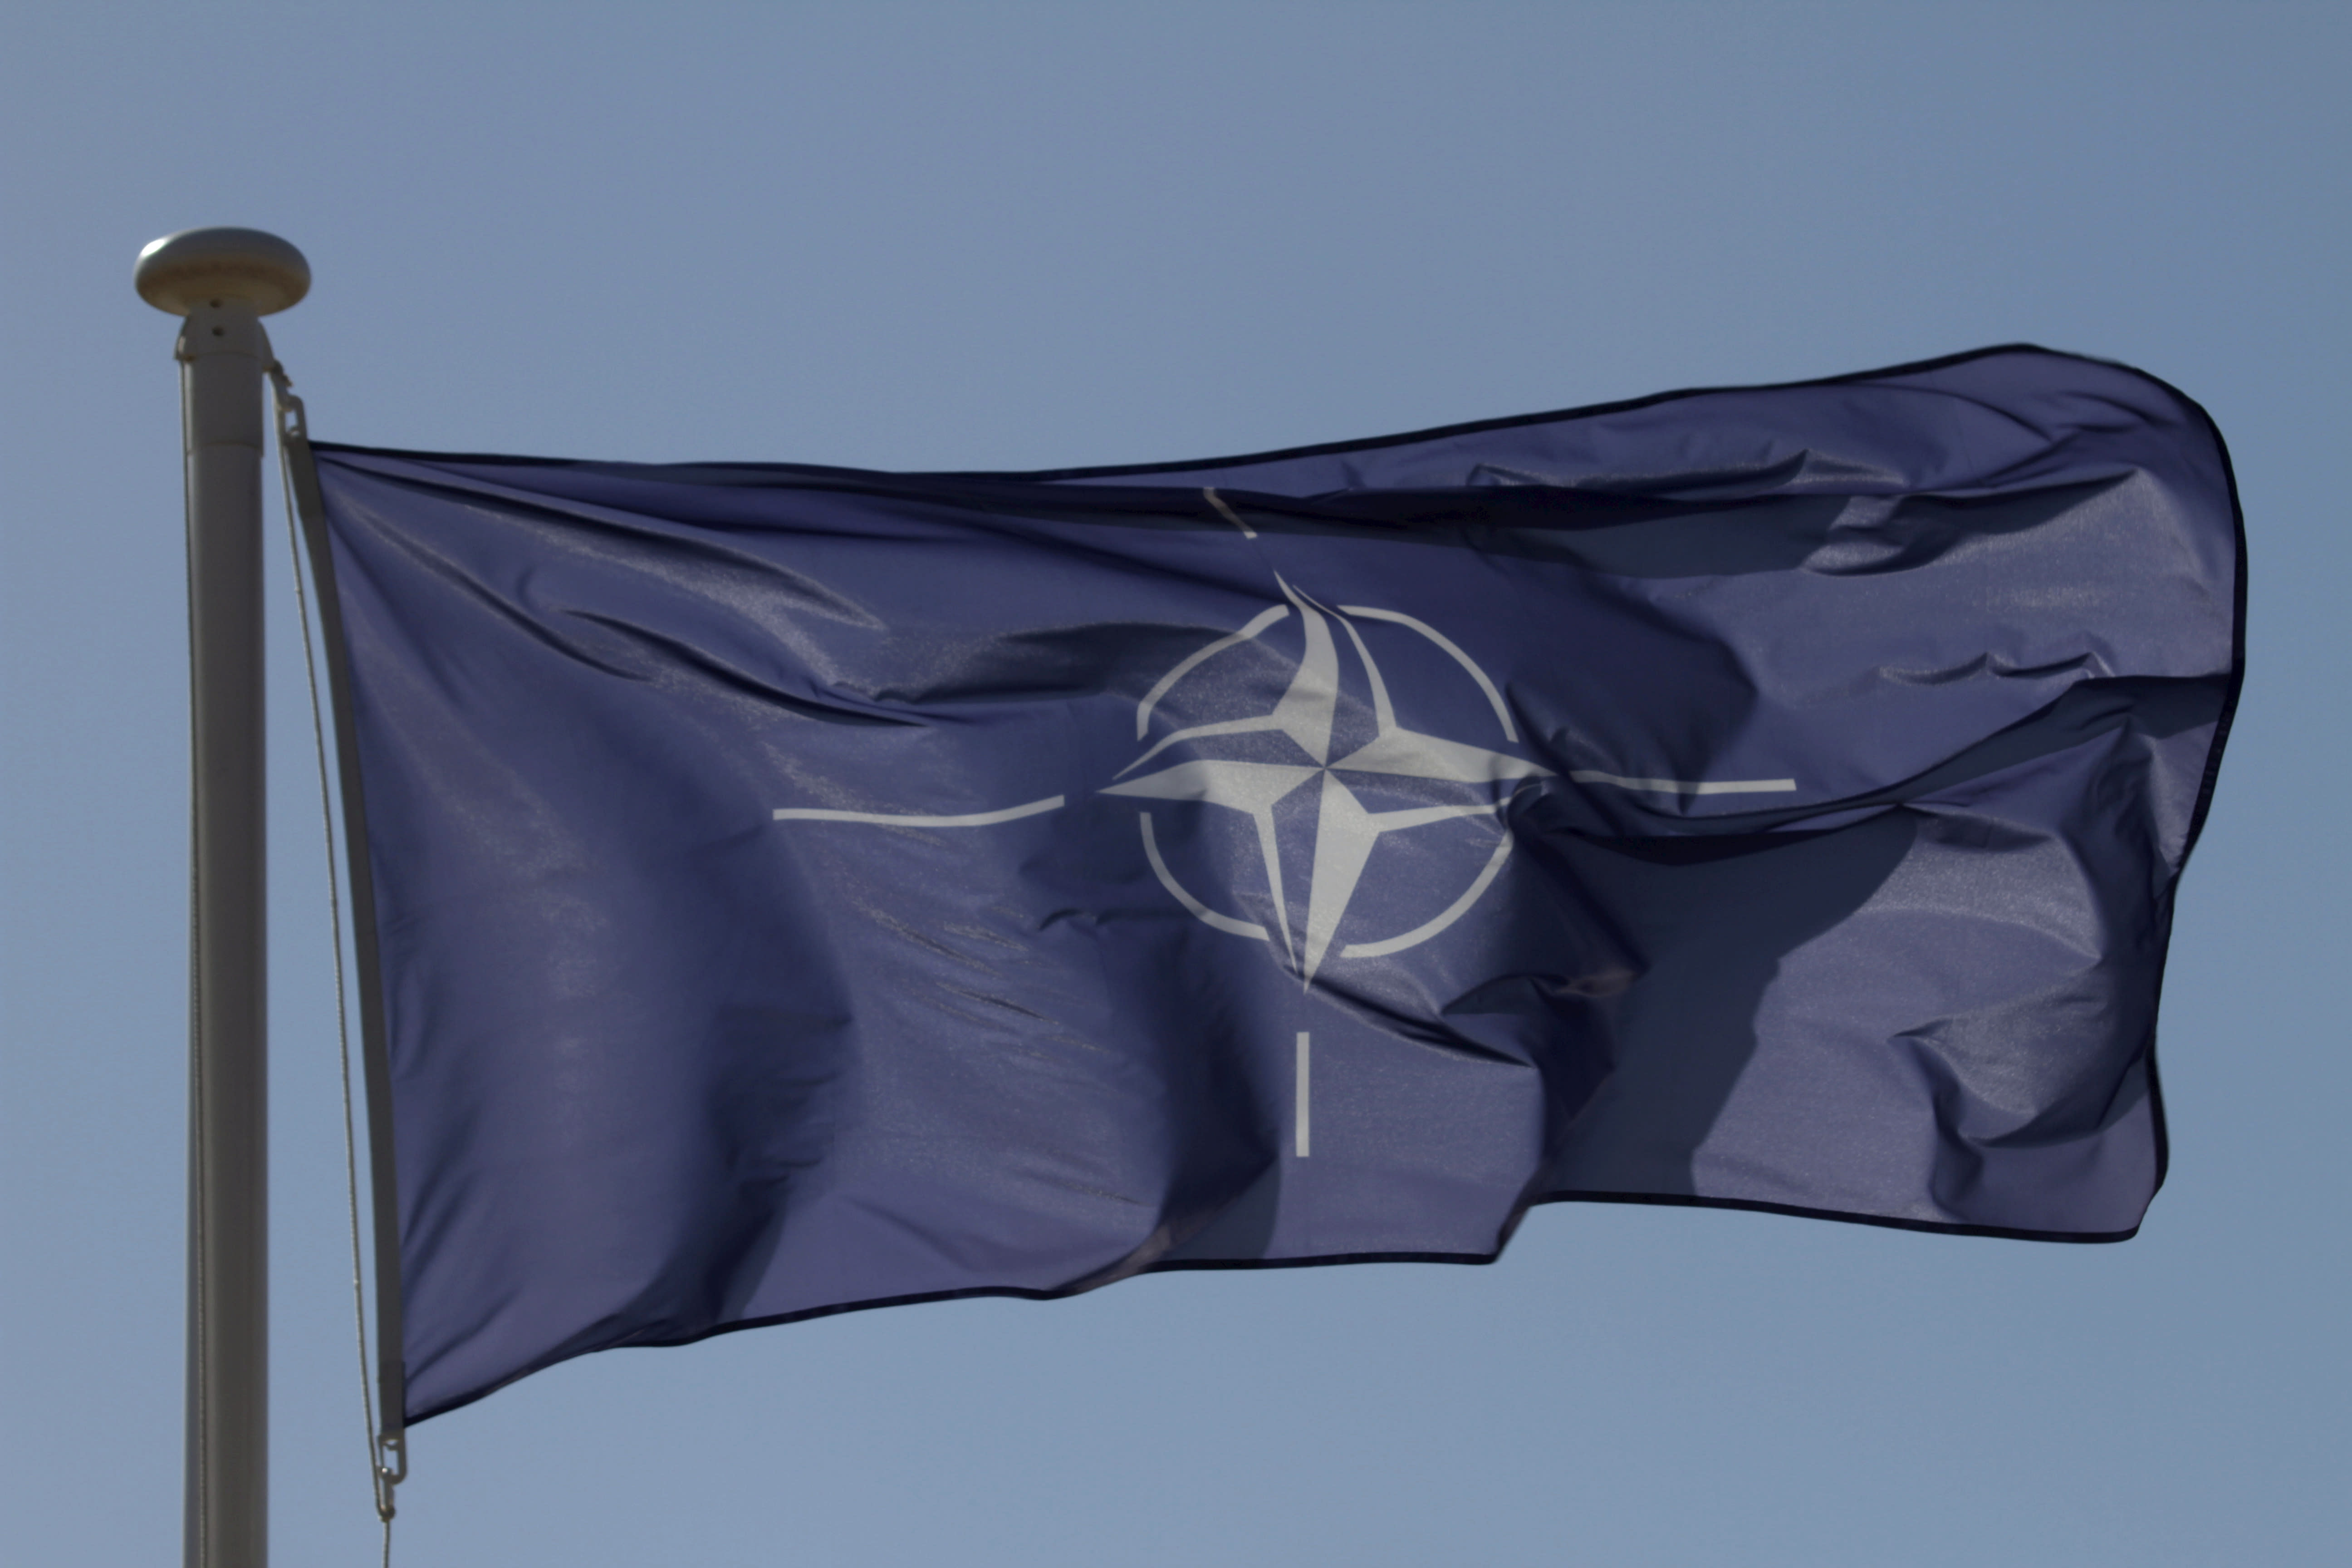 Yle’s survey: Support for NATO membership rose to 76 per cent